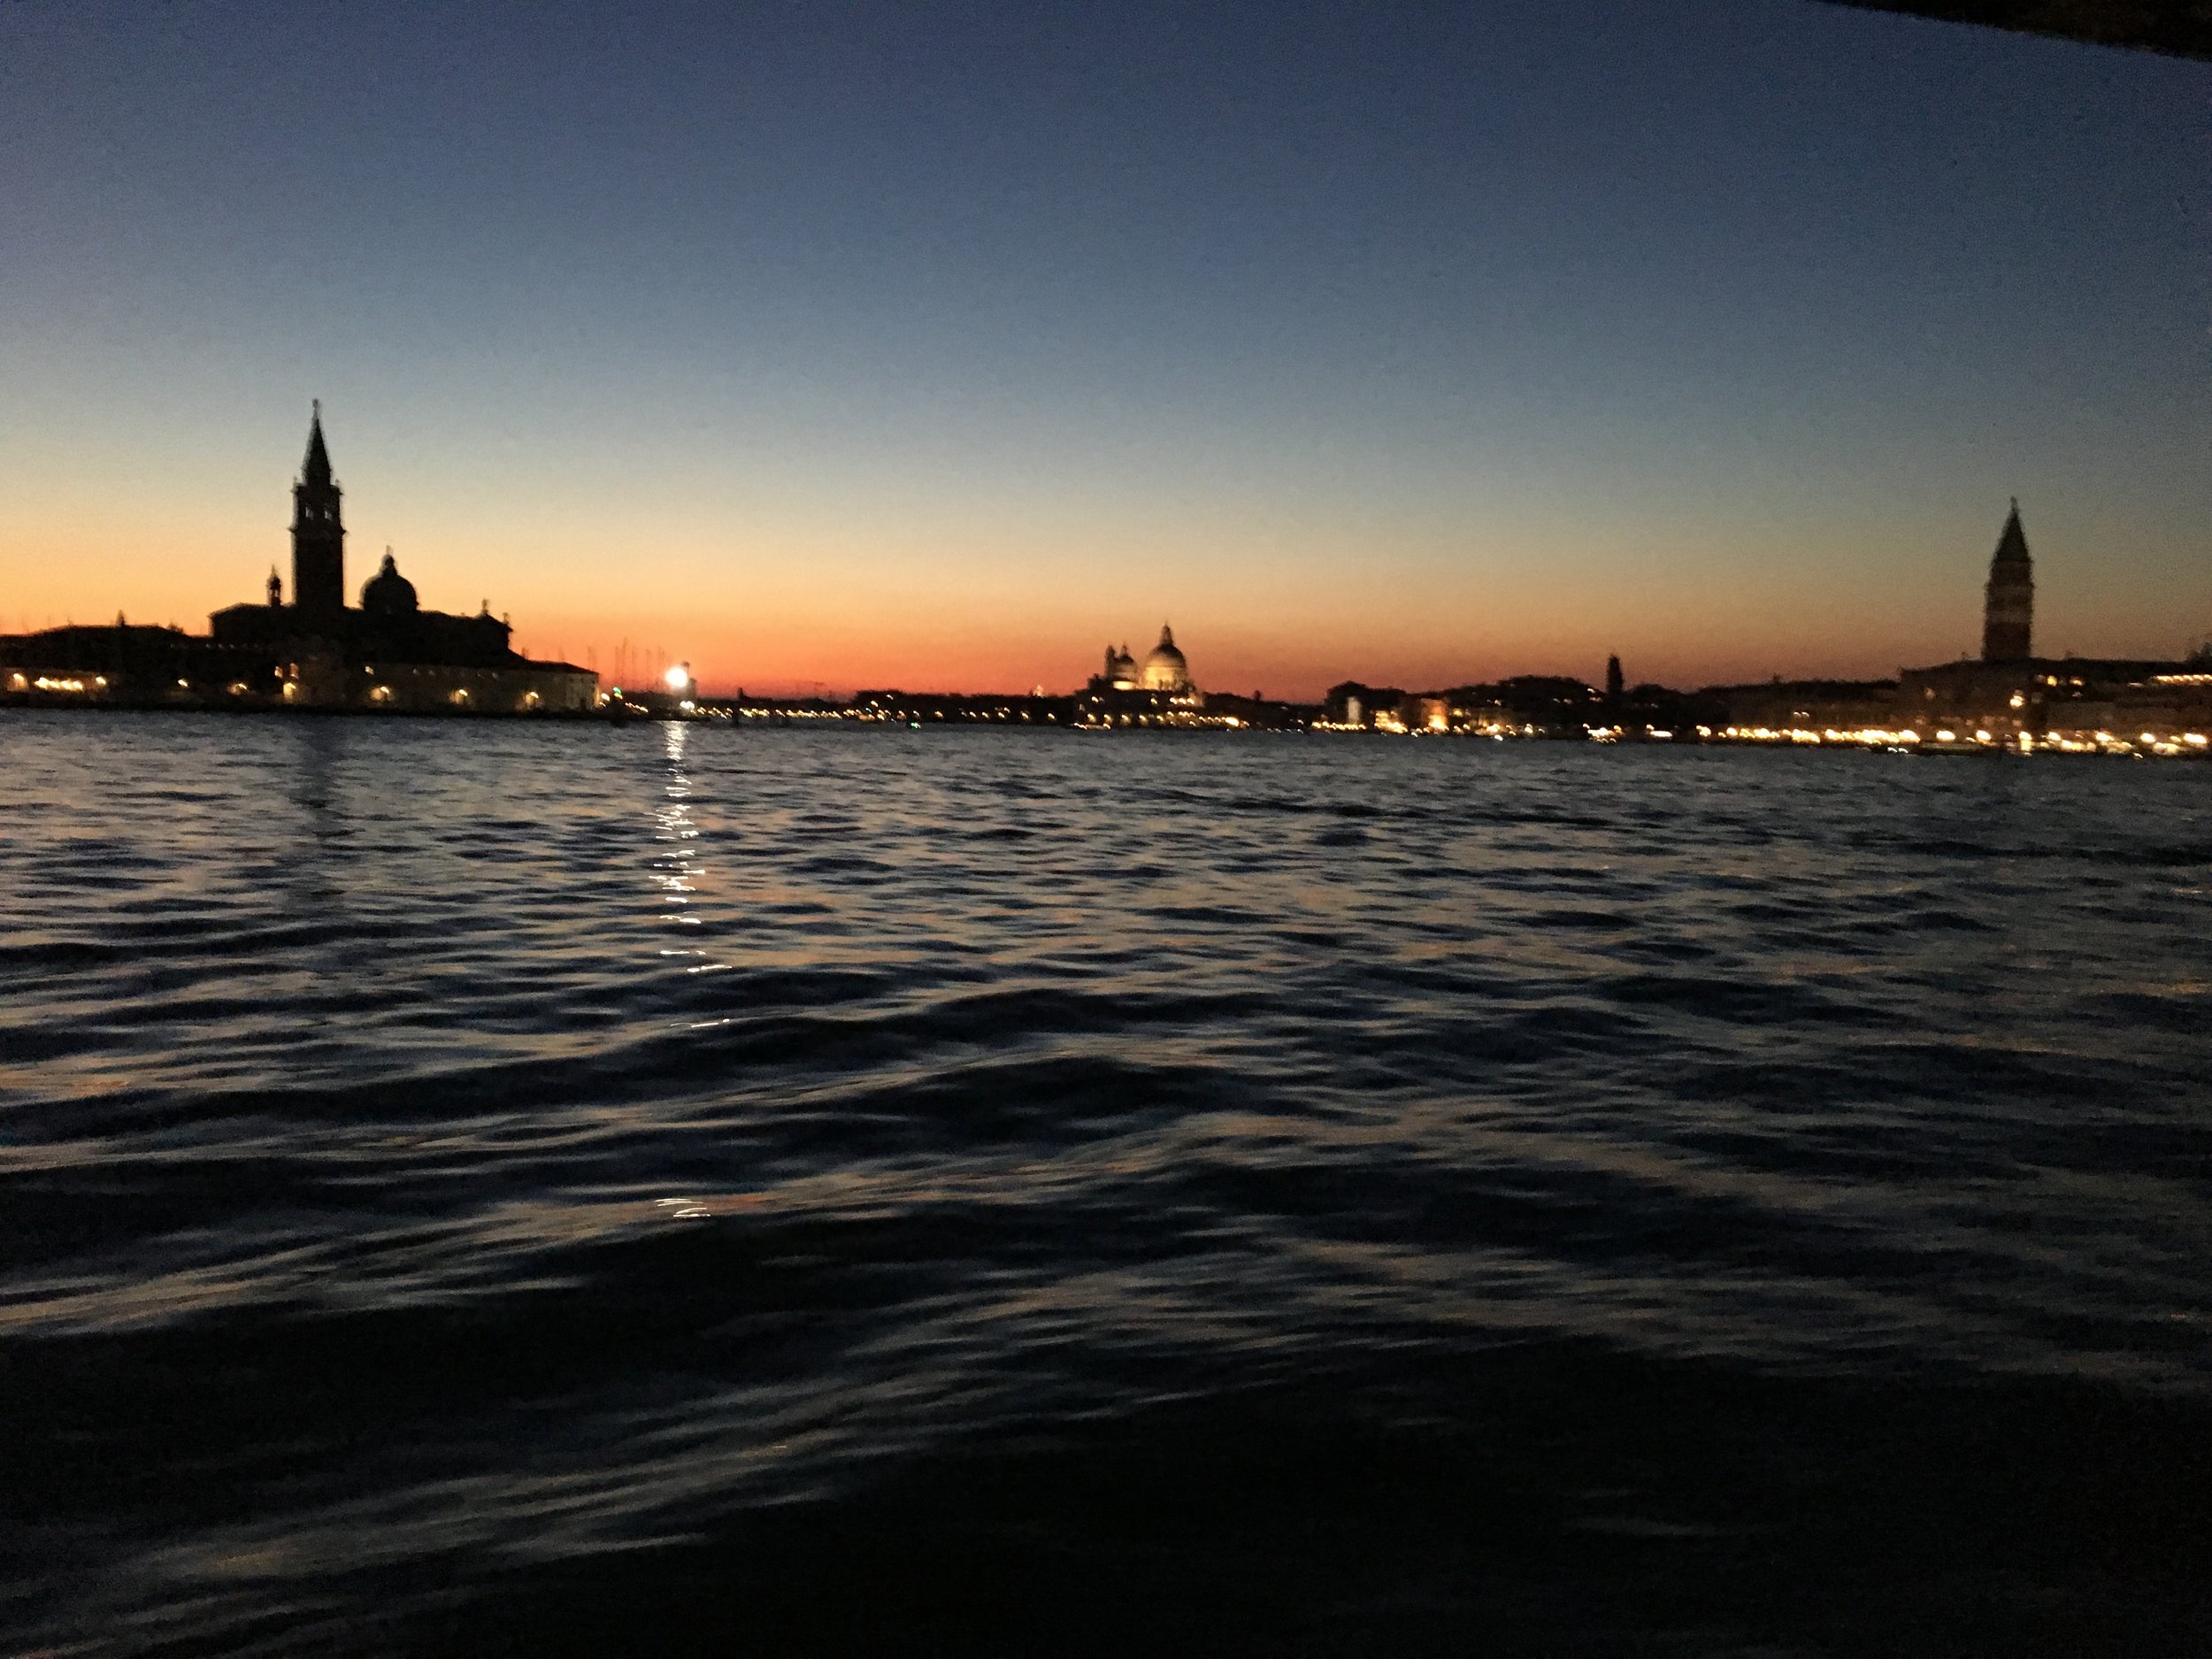 Approaching Venice by vaparetto at sunset